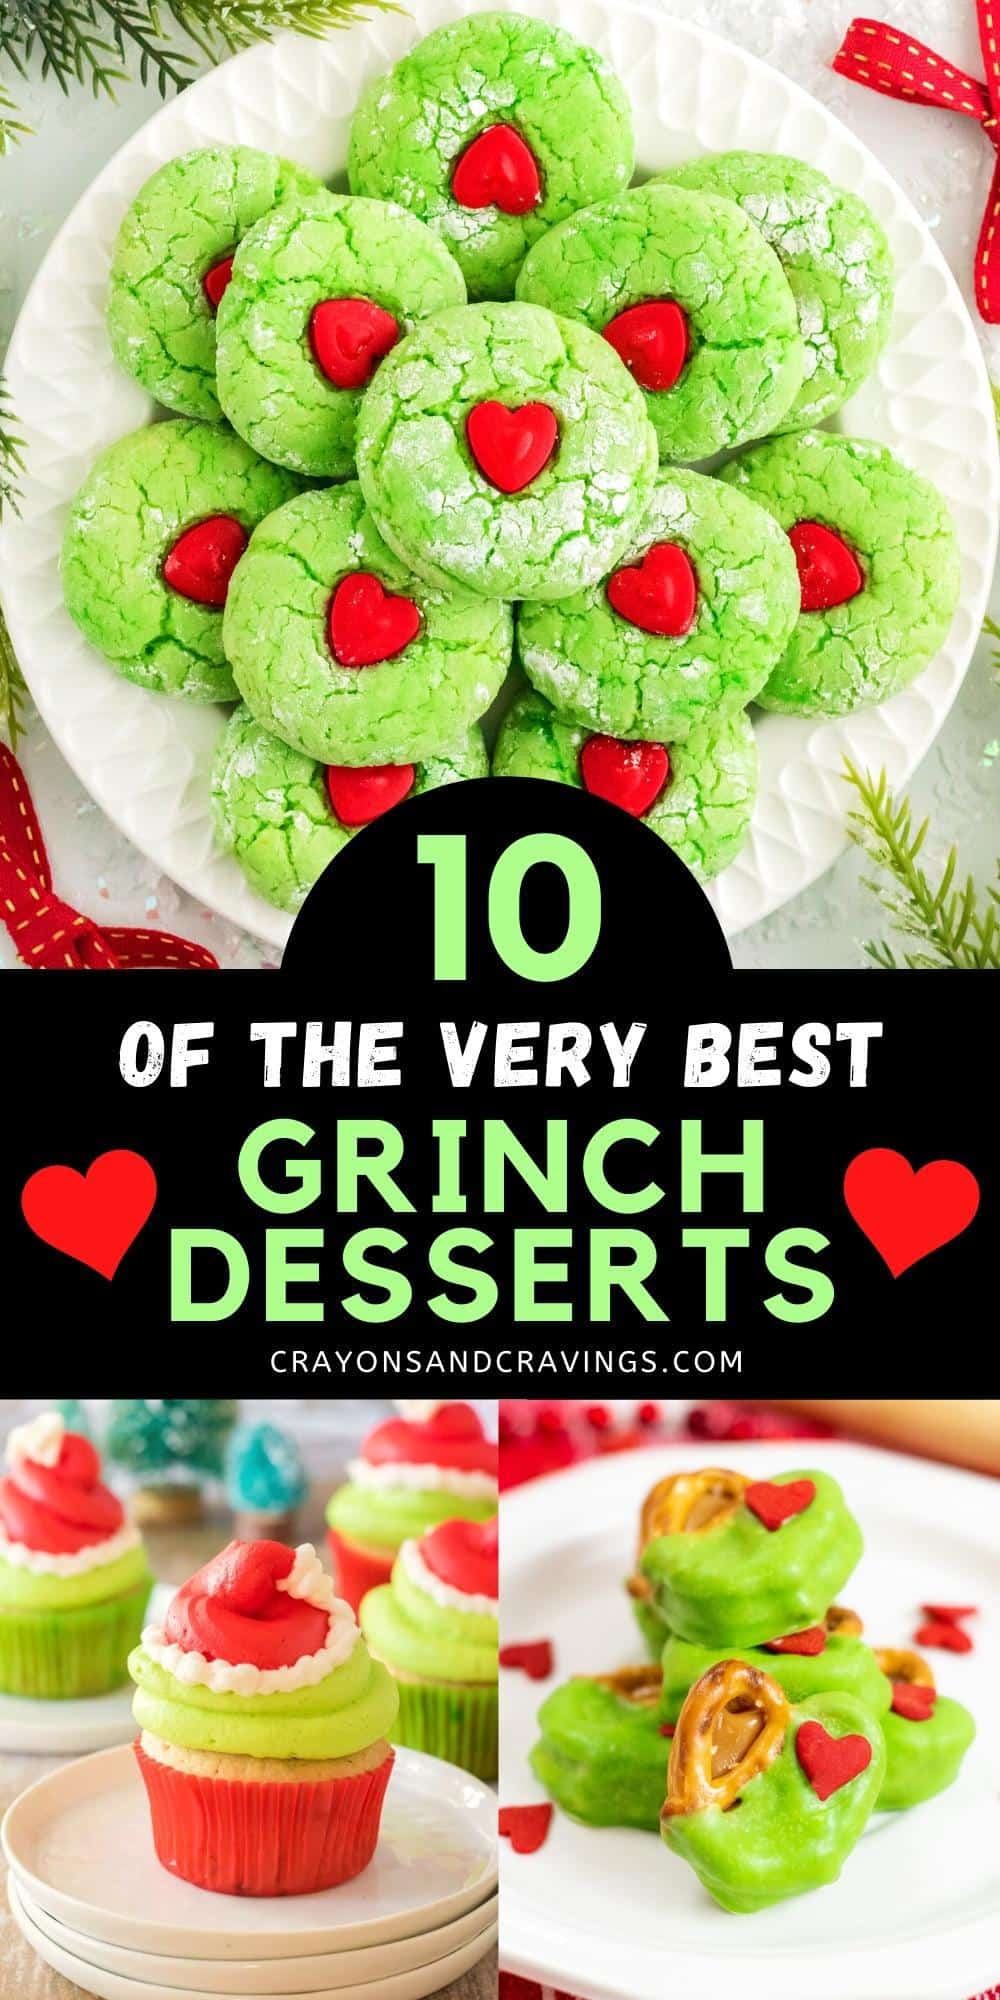 10 of the very best grinch desserts